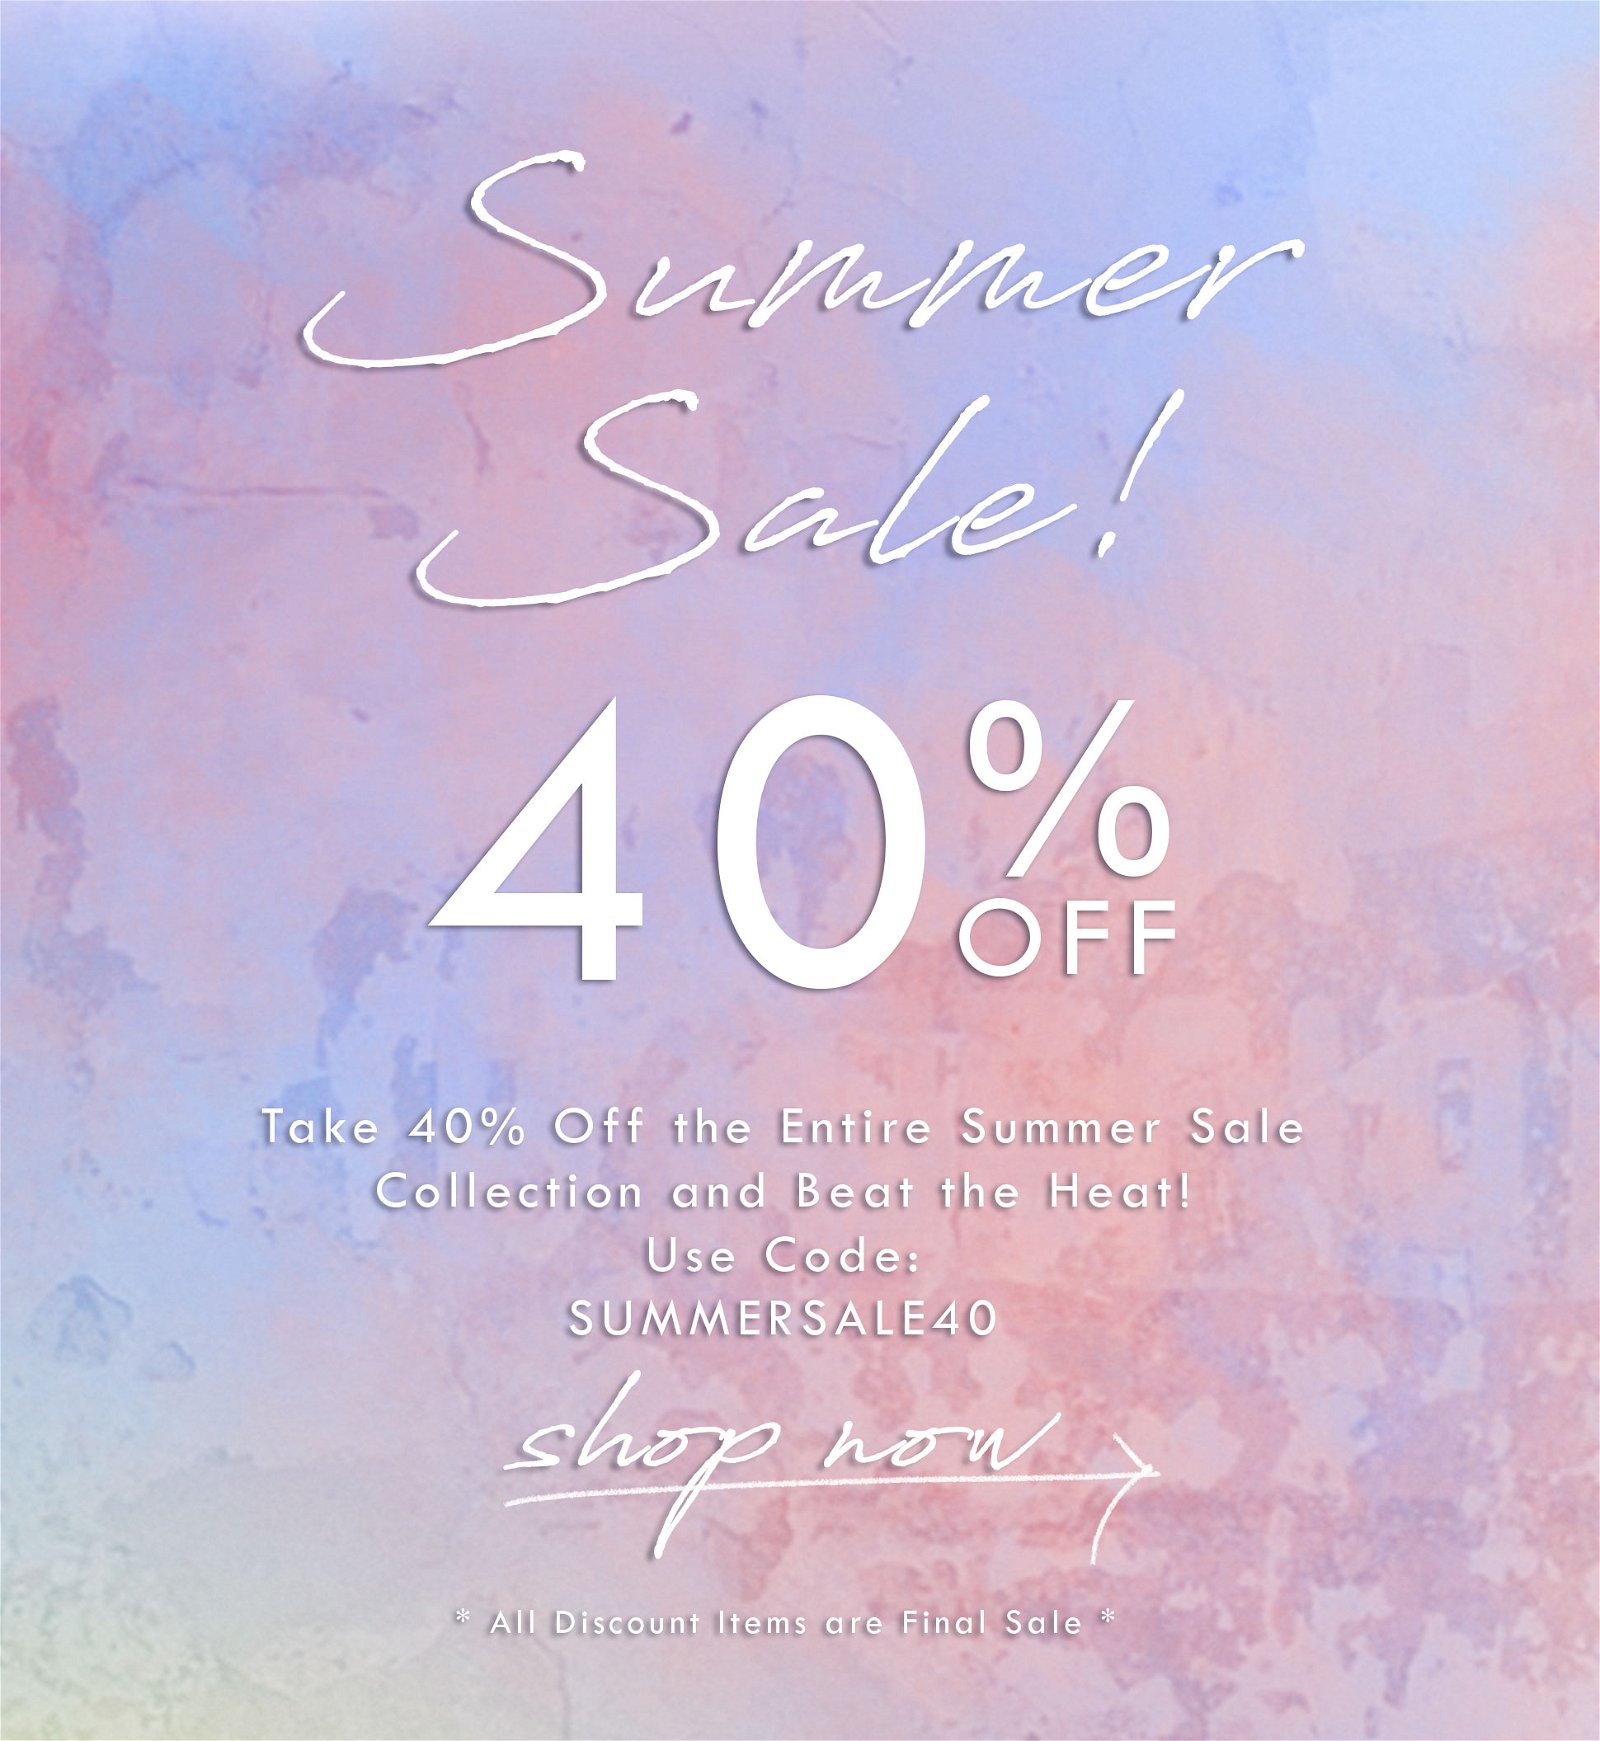 Shop Summer Sale Collection to Get 40% Off. Use Code: SUMMERSALE40